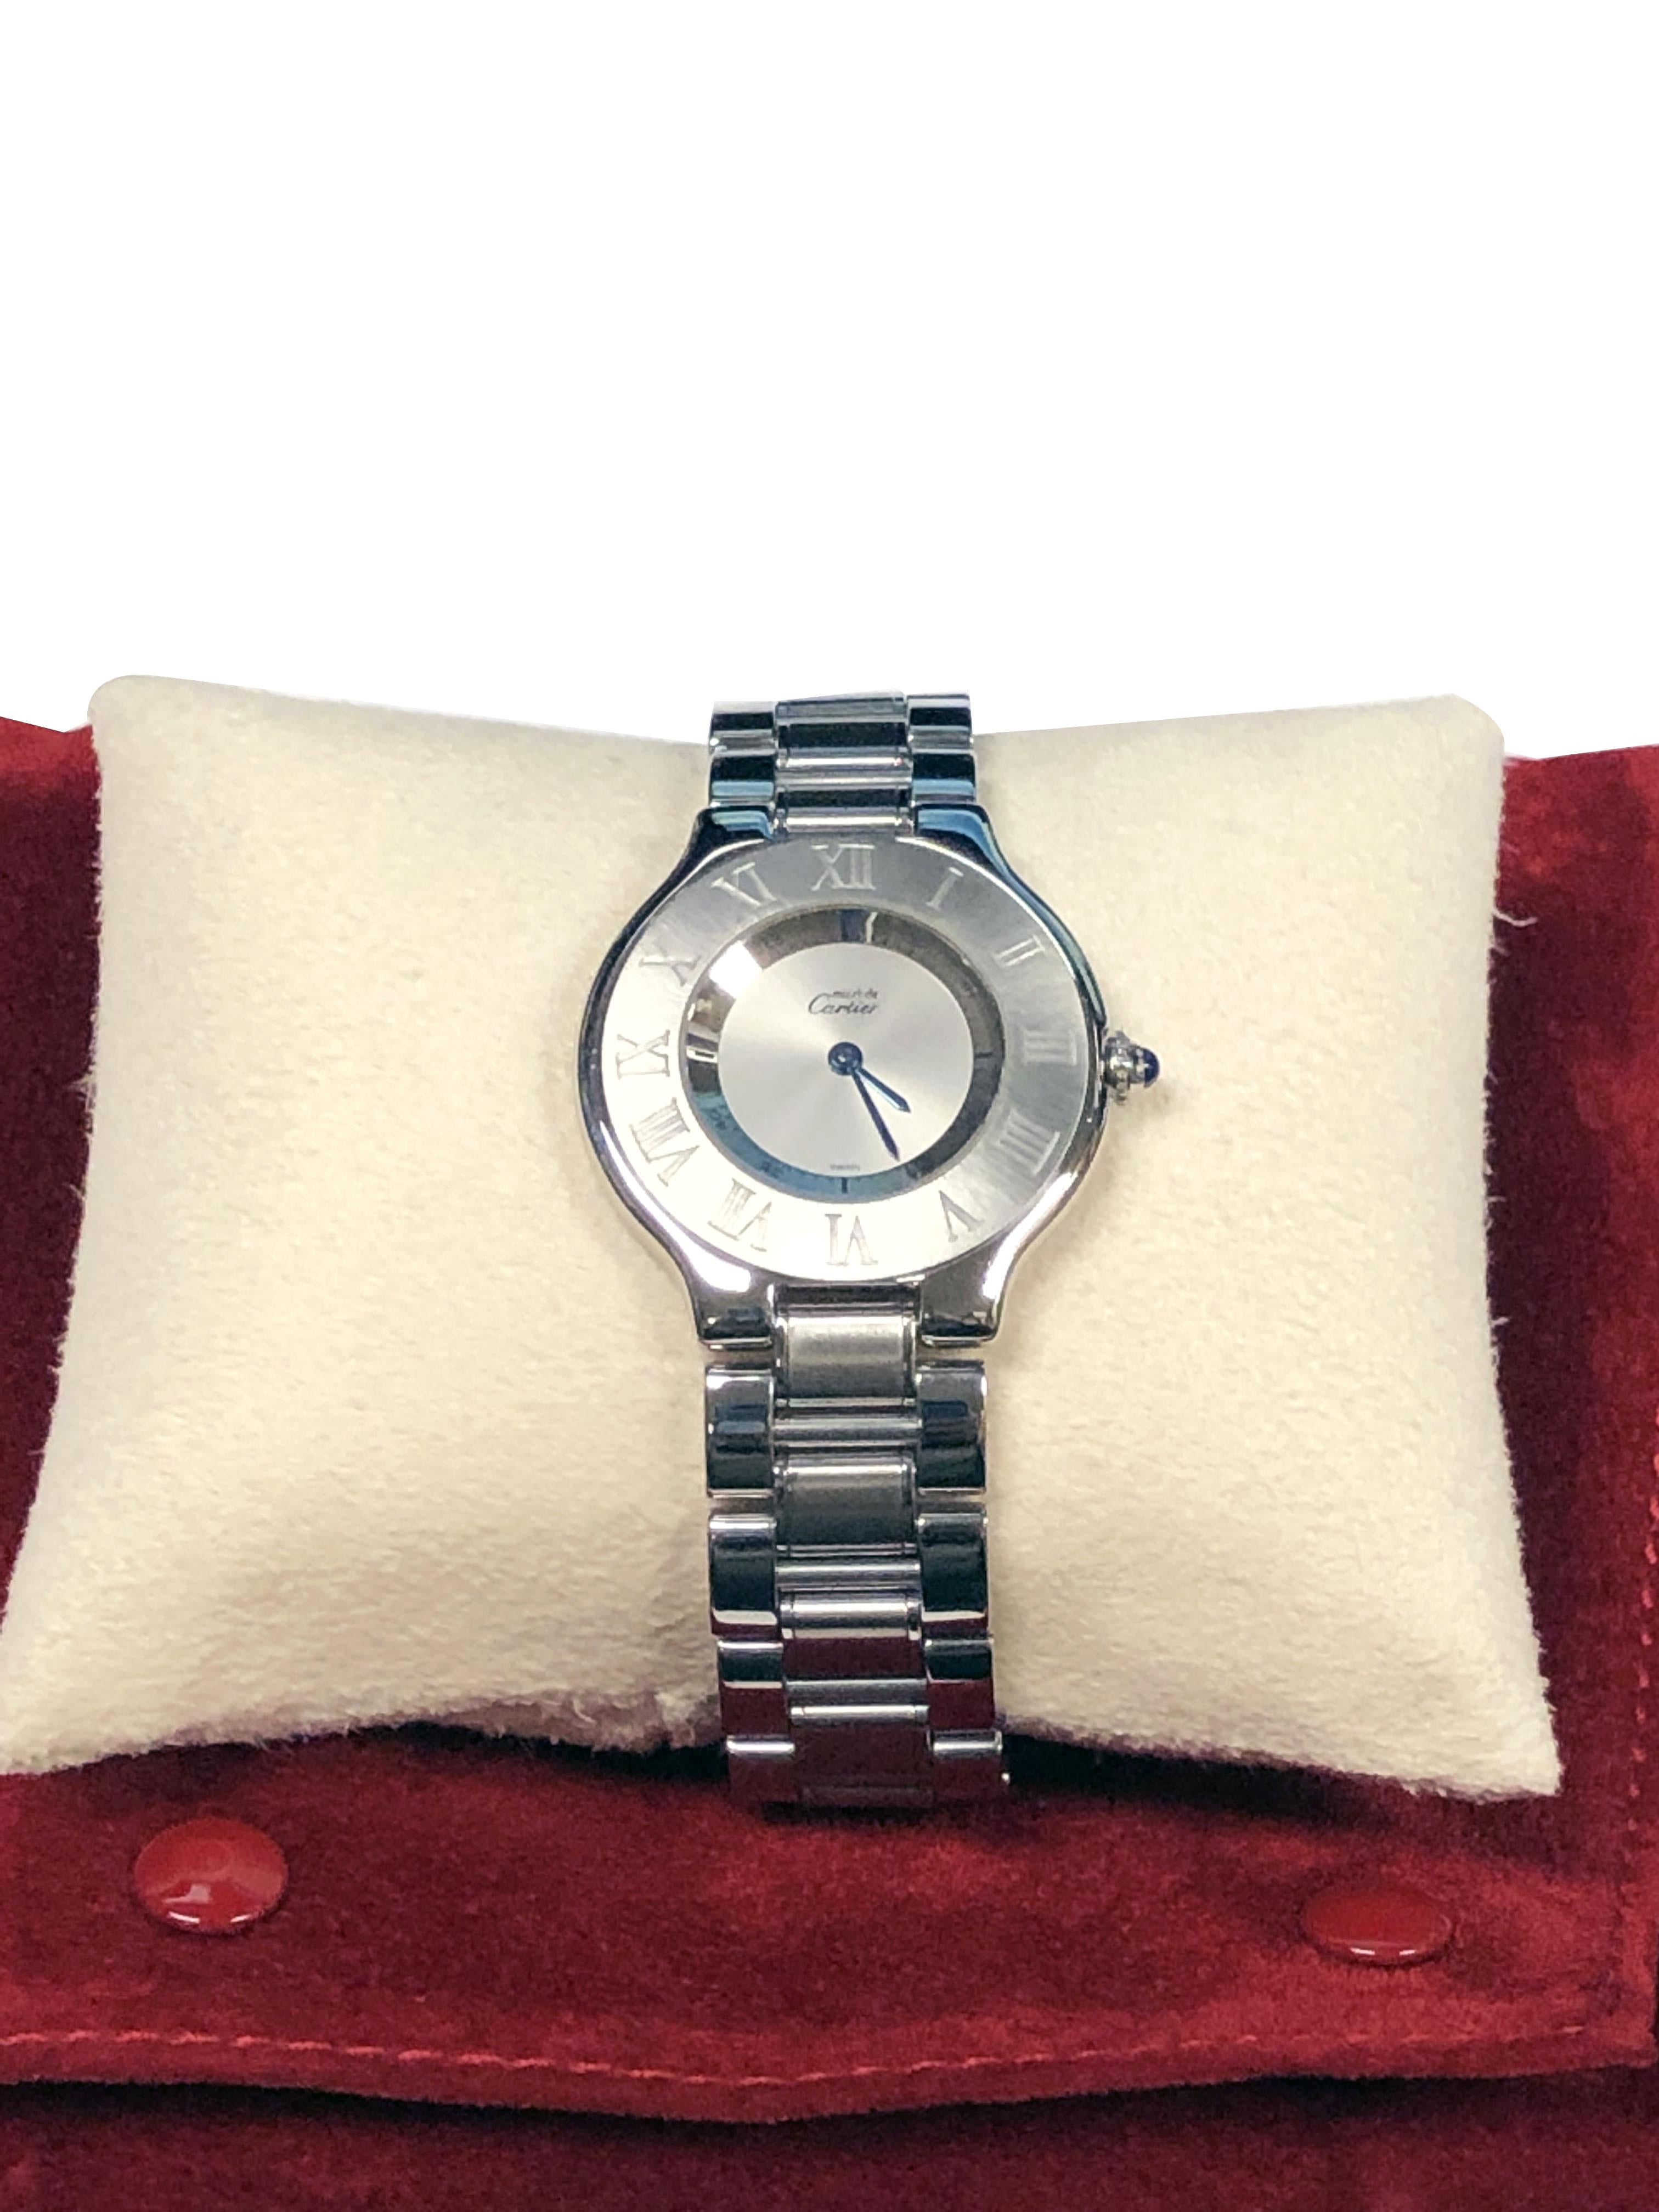 Cartier Must 21 Reference 1330 Mid Size Steel Quartz Wrist Watch  In Excellent Condition For Sale In Chicago, IL